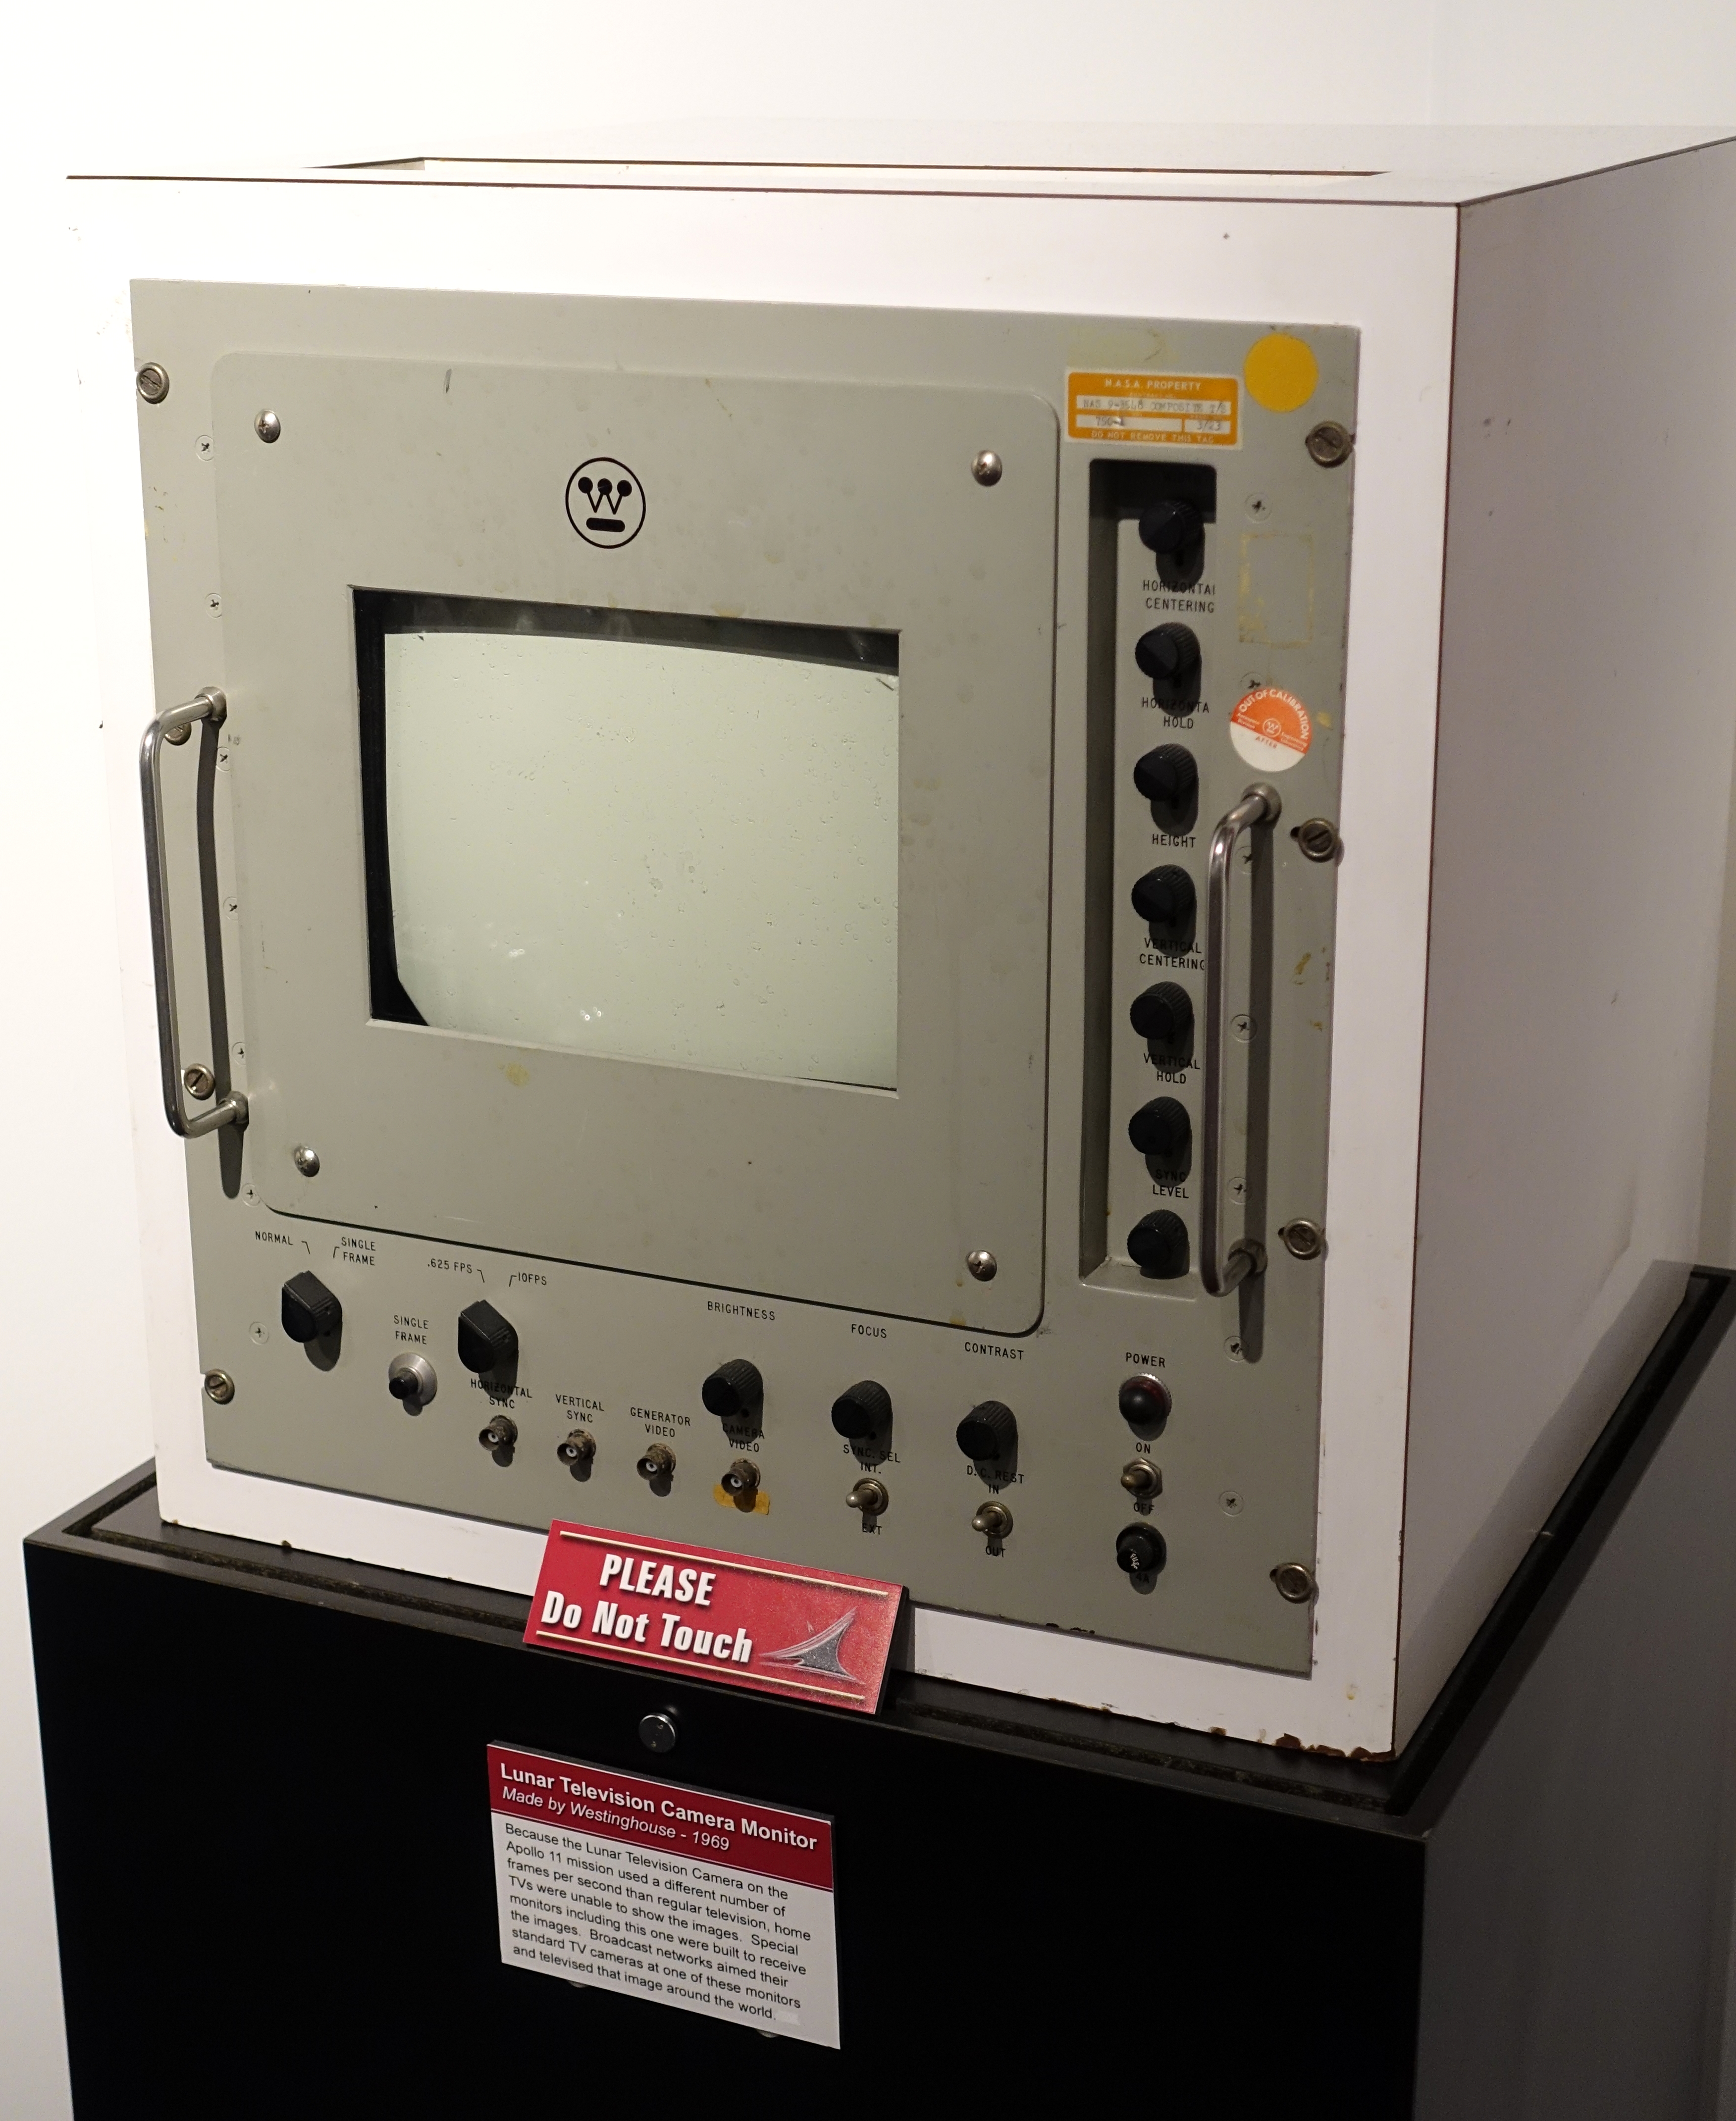 Lunar Television Camera Monitor, Westinghouse, 1969 - National Electronics Museum - DSC00574